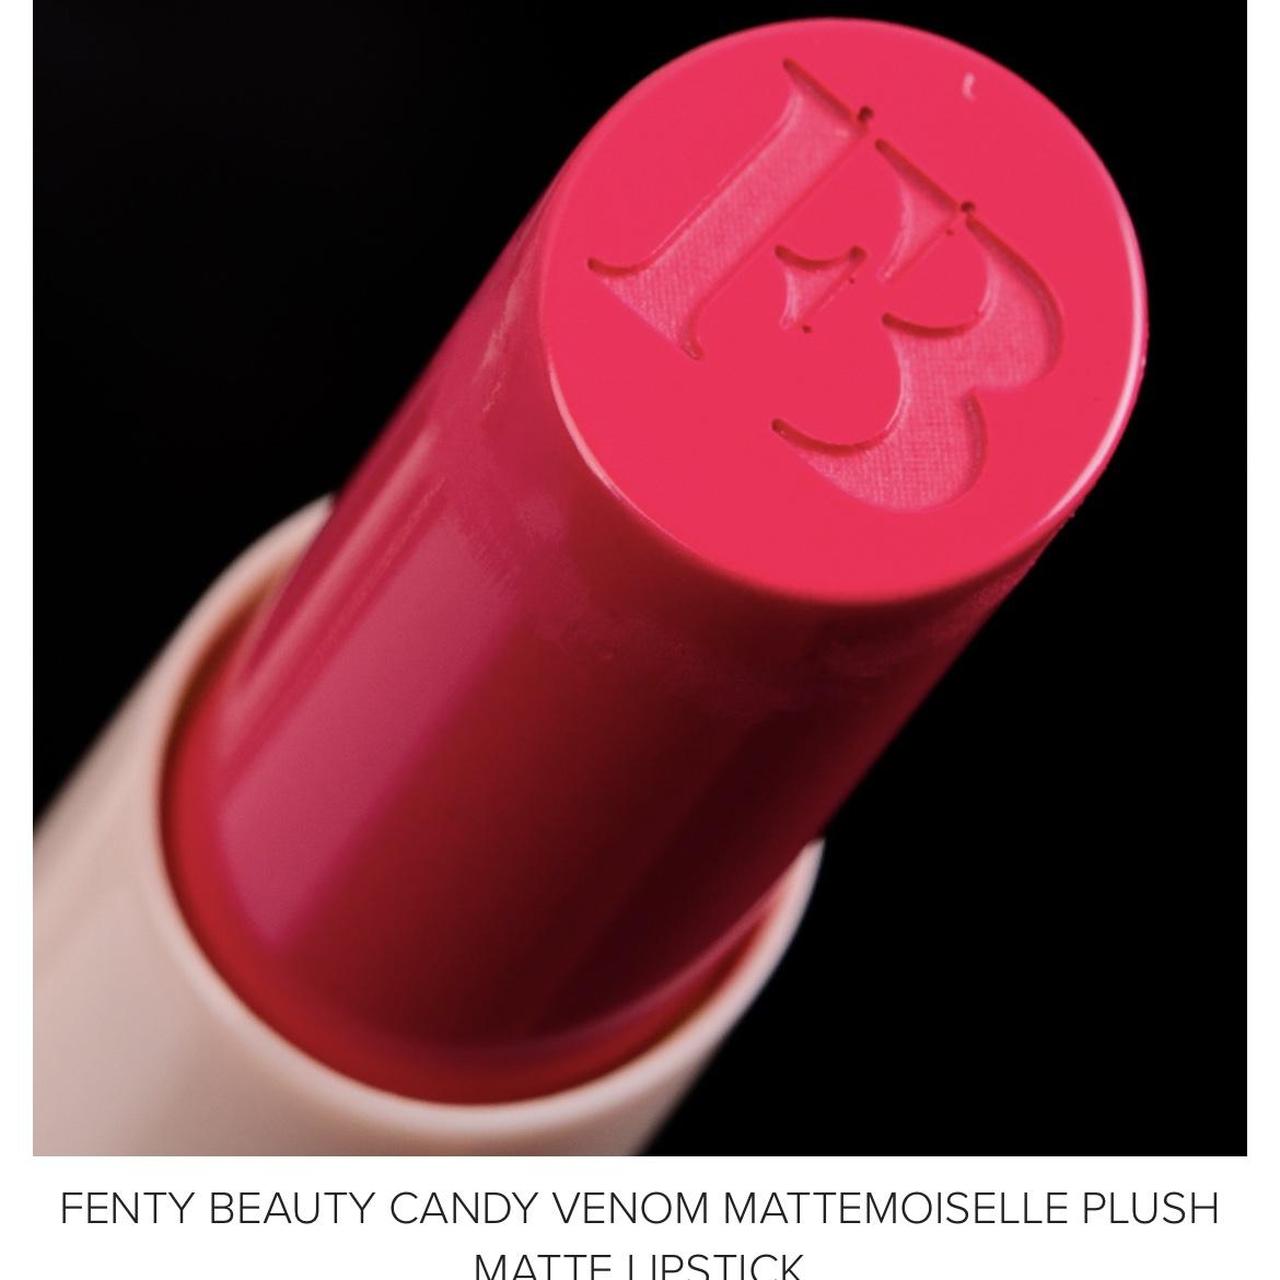 Fenty Beauty Pink and Red Makeup (2)